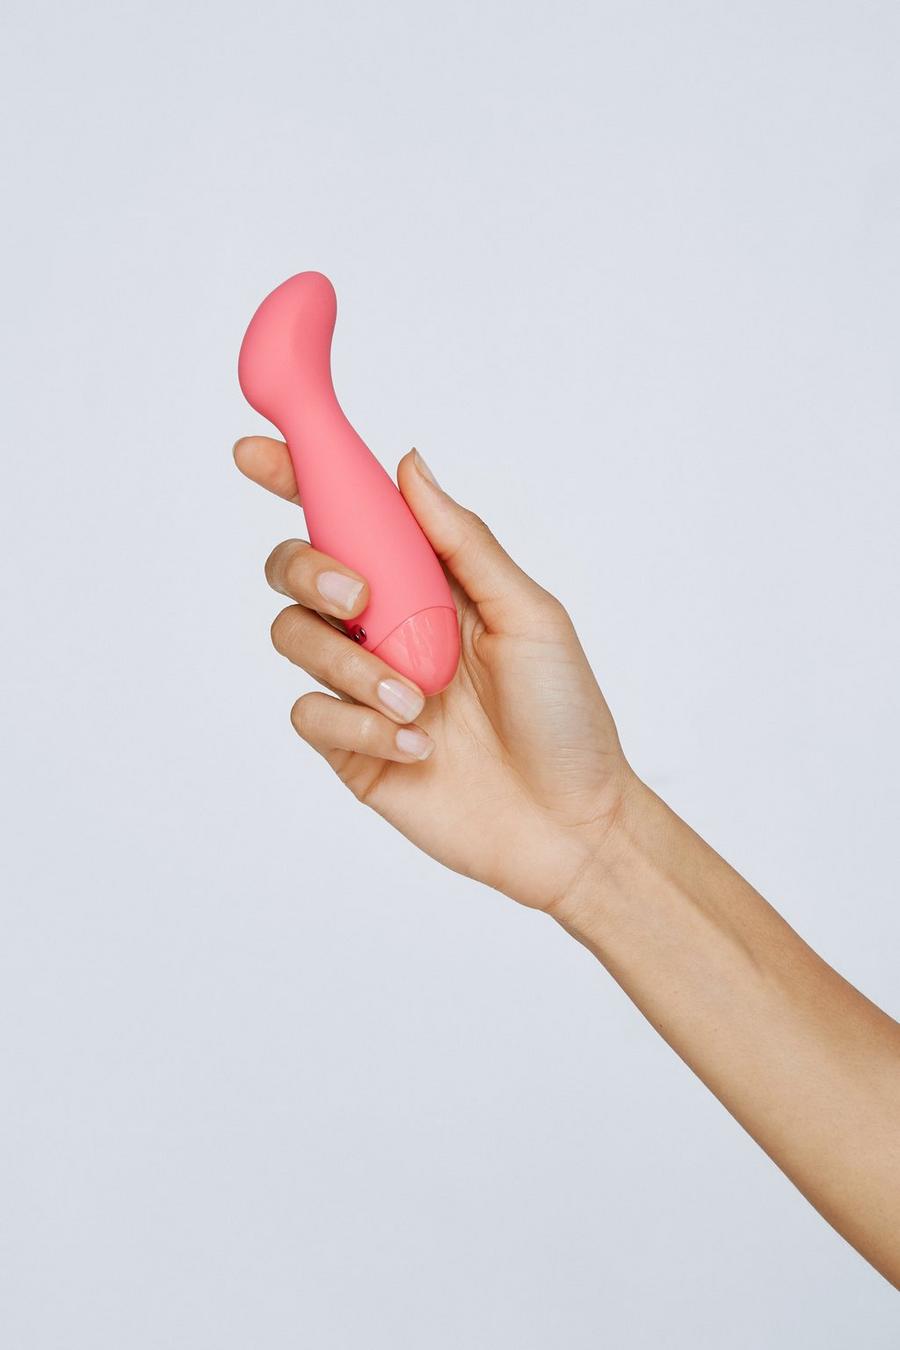 Coral 10 Function Rechargeable G-spot Wand Vibrator Sex Toy